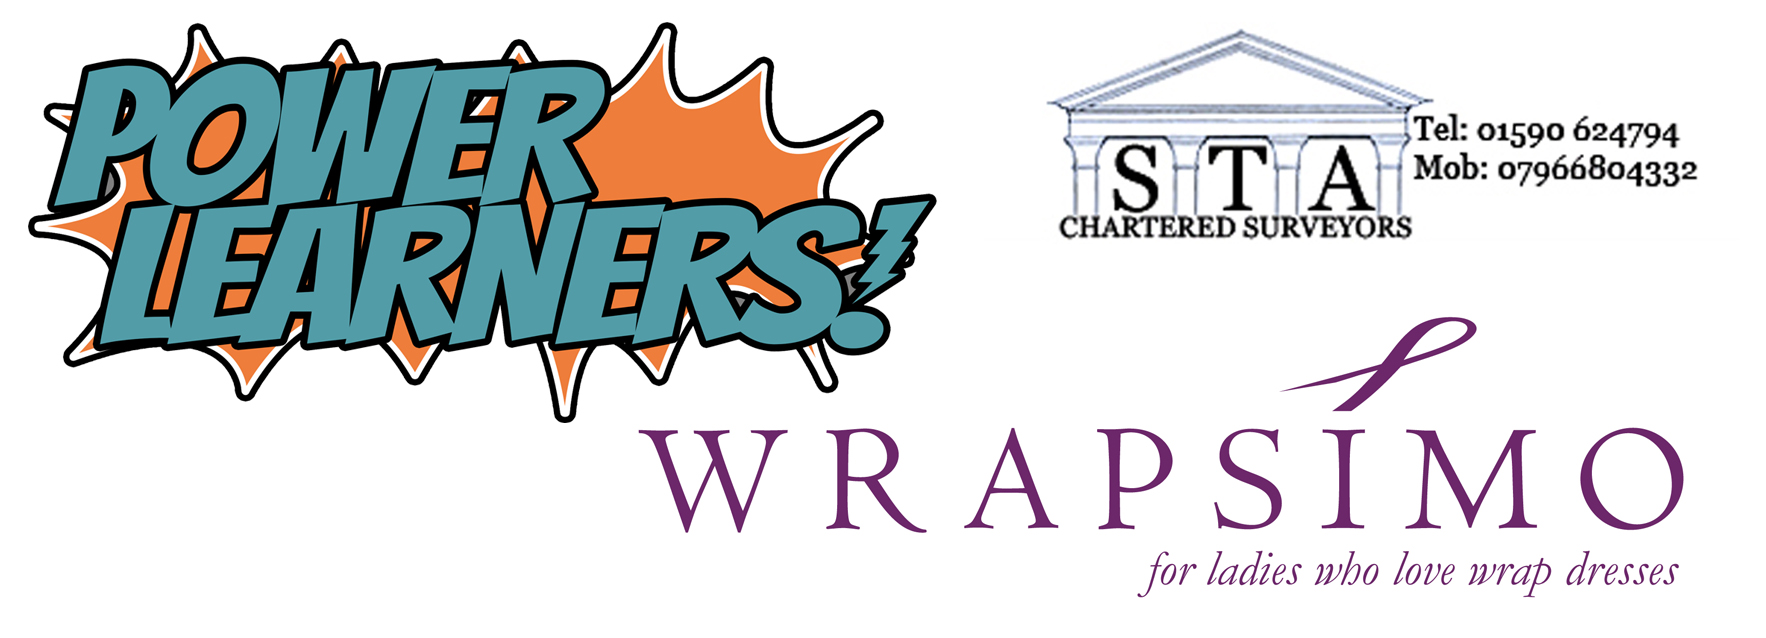 New Commissions – Wrapsimo, Power Learners and STA Chartered Surveyors